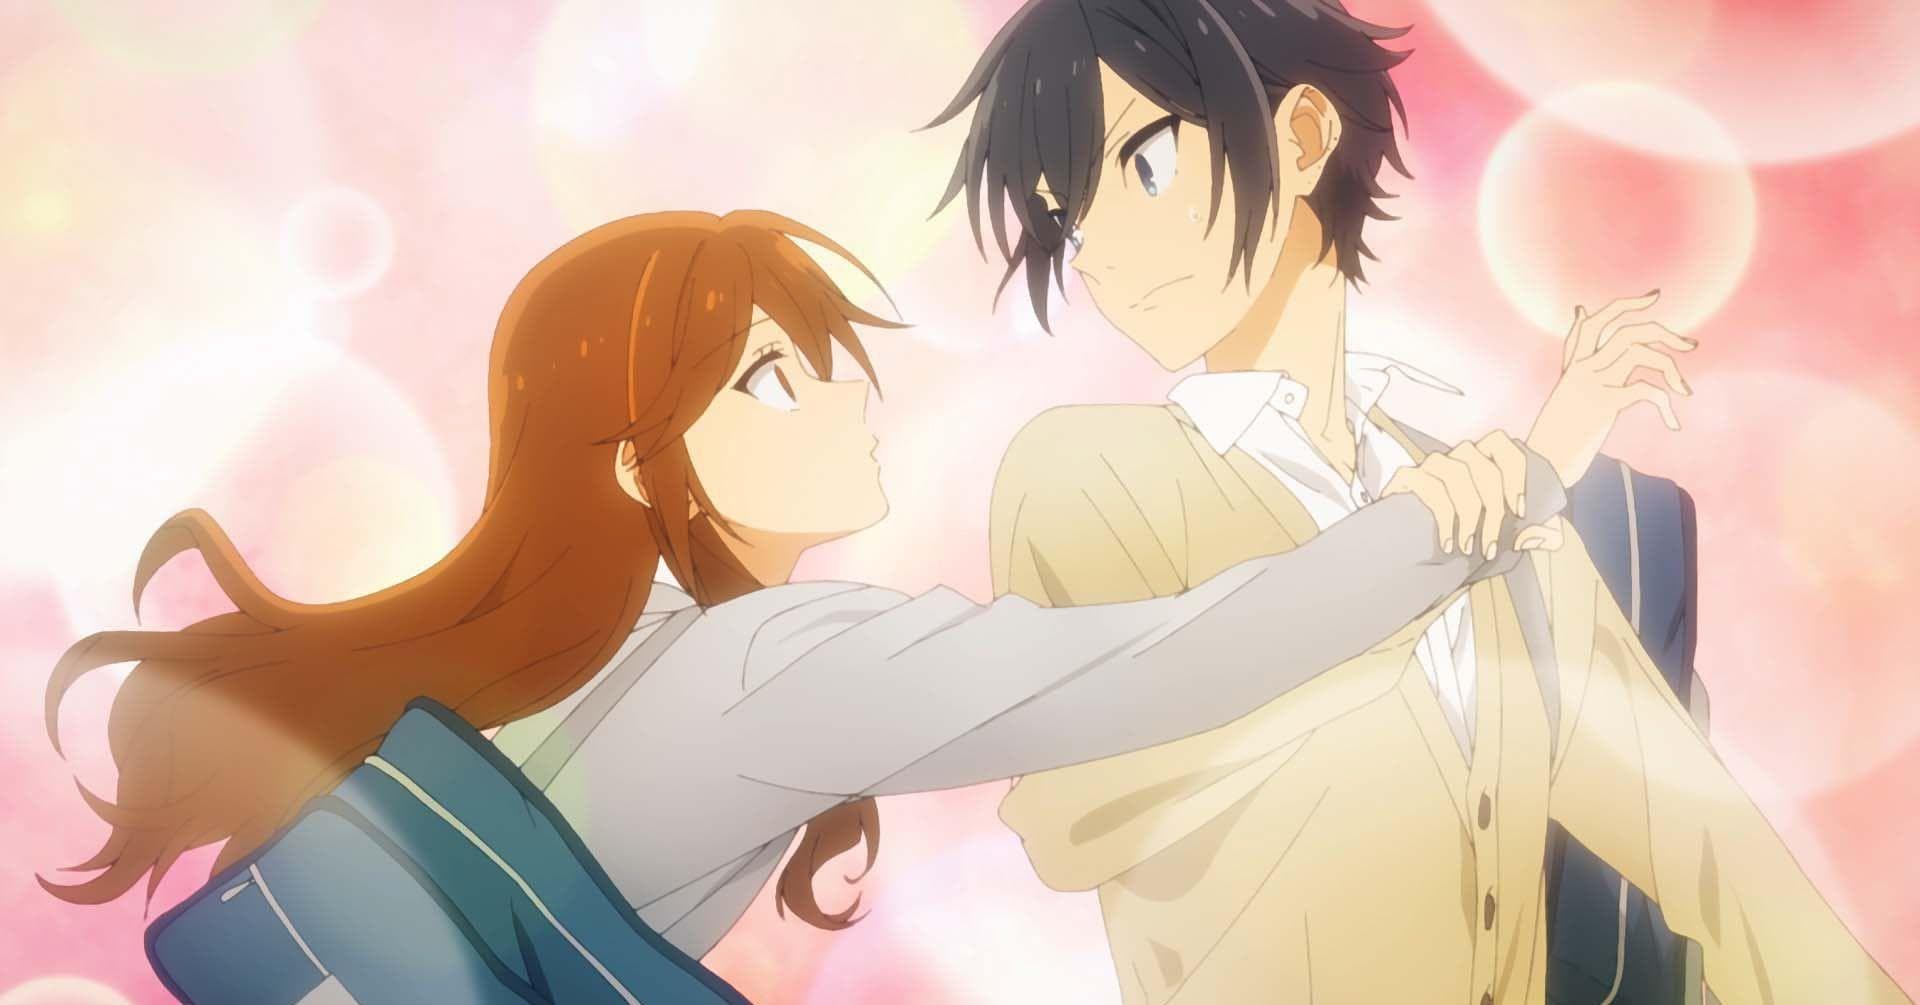 Ranking All The Romance Anime of 2021 